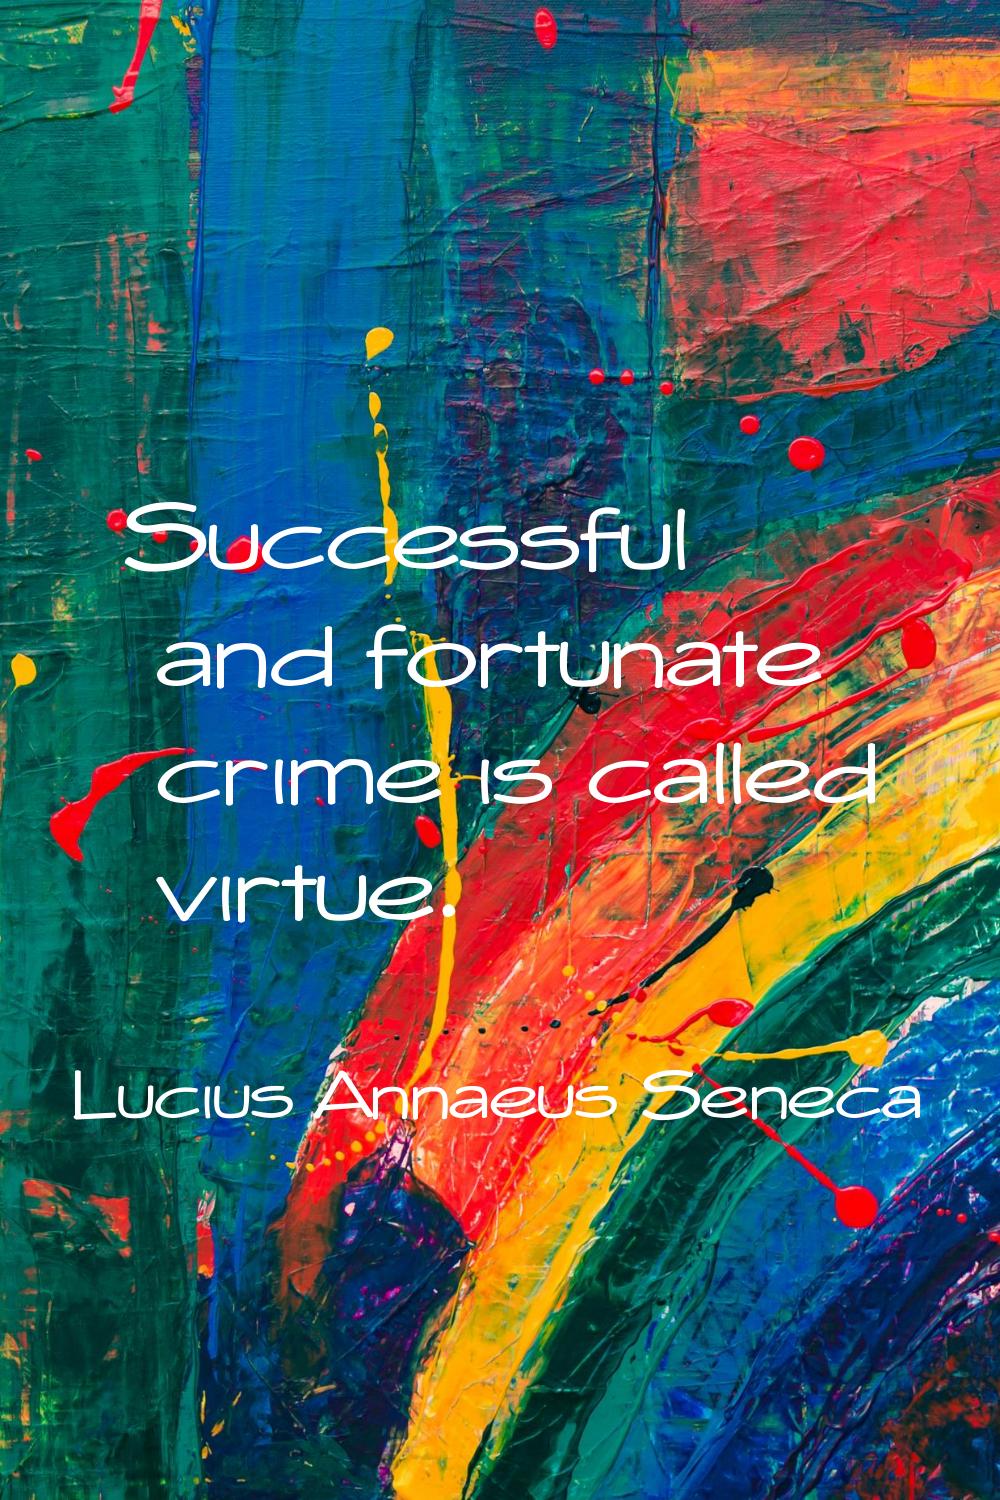 Successful and fortunate crime is called virtue.